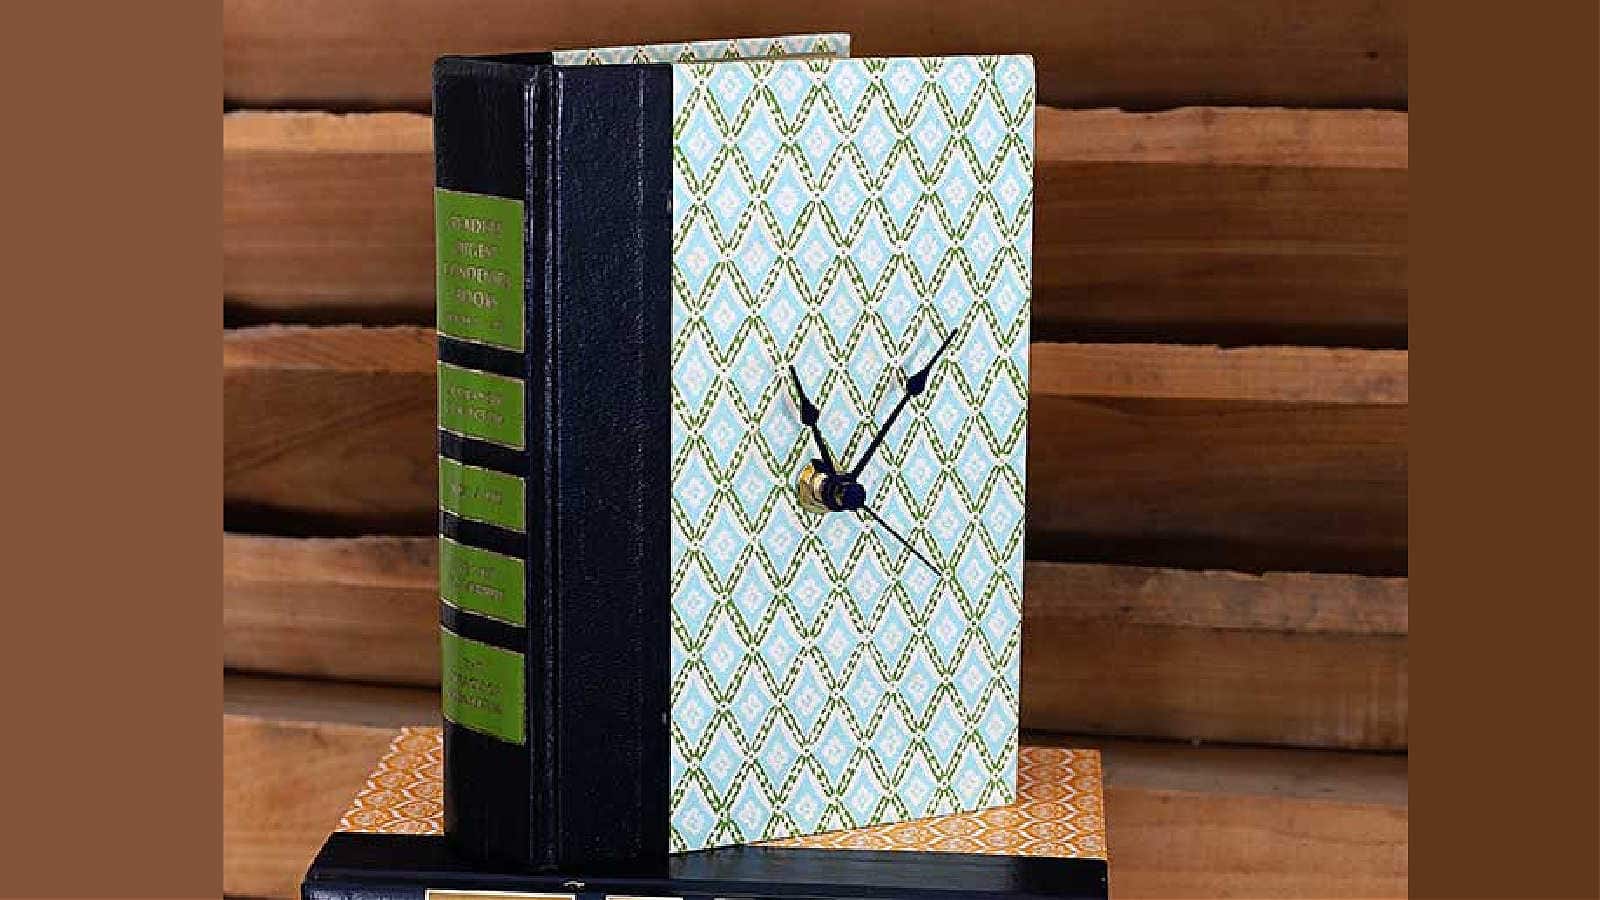 upcycling a book into a clock